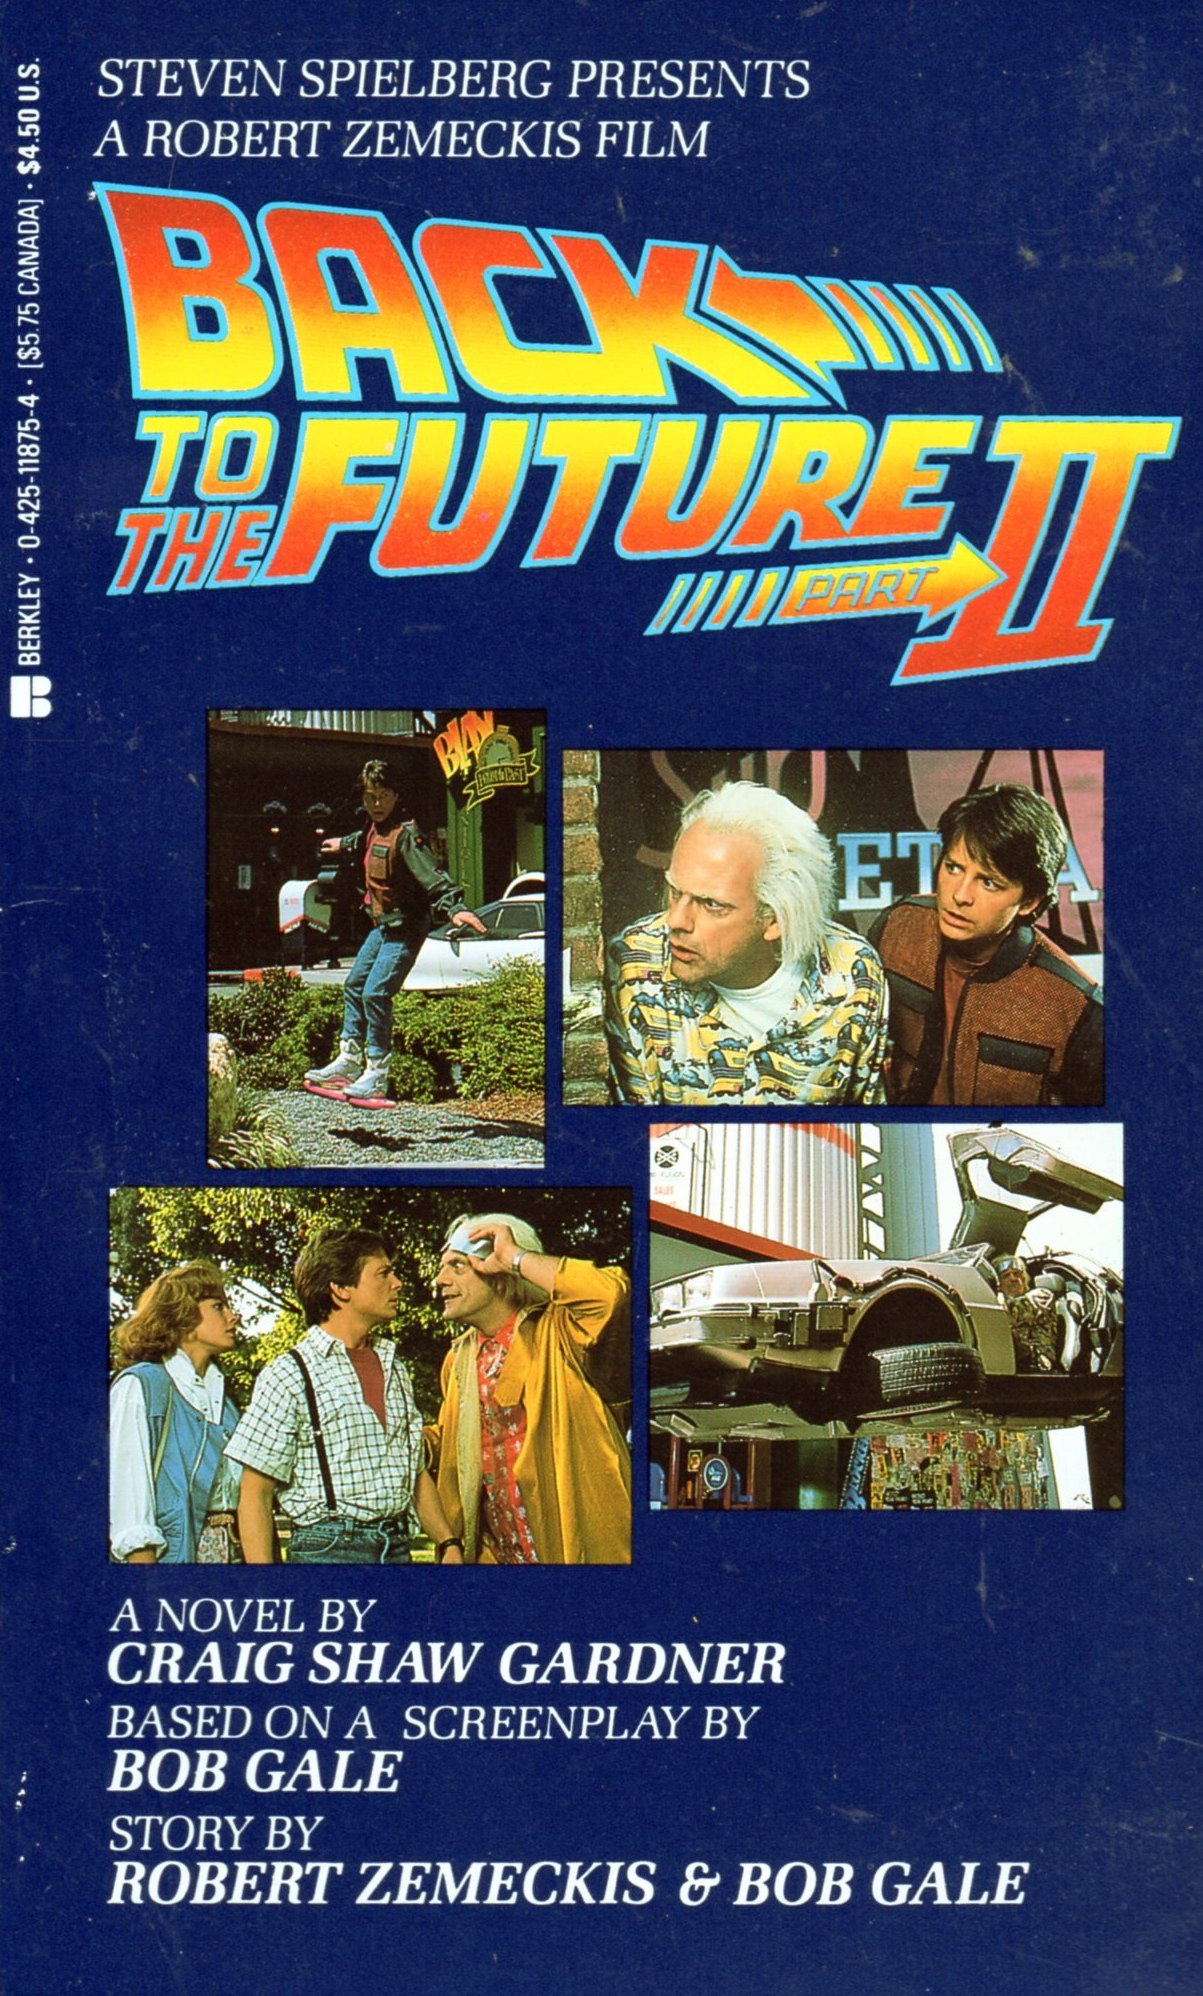 back to the future part iii book